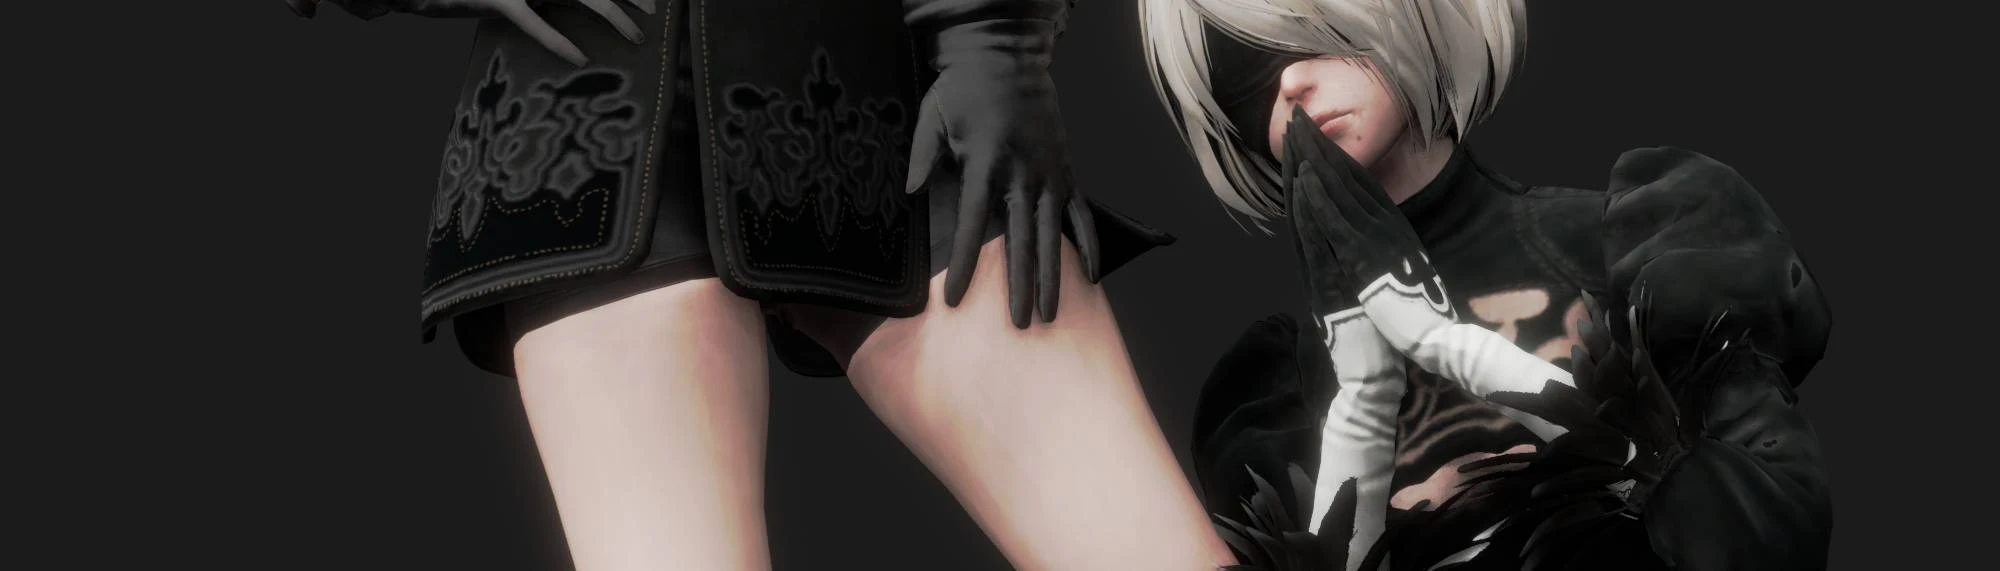 2B Player Model Replacement at NieR: Automata Nexus - Mods and